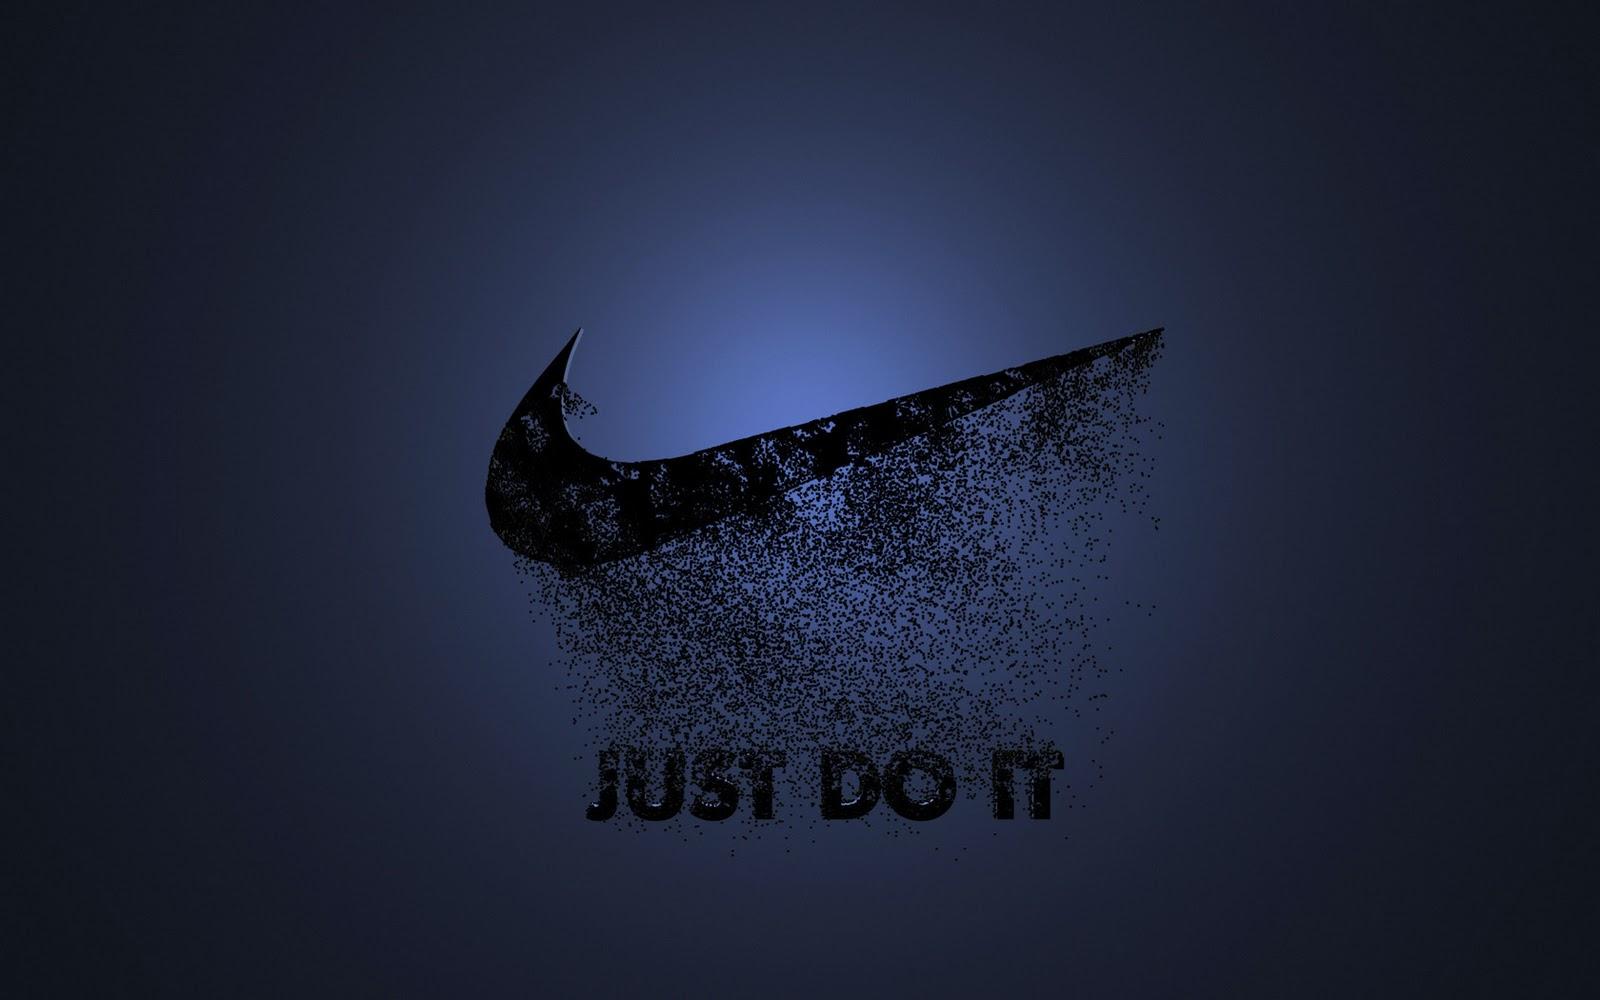 Wallpaper logo firm nike just do it images for desktop section спорт   download